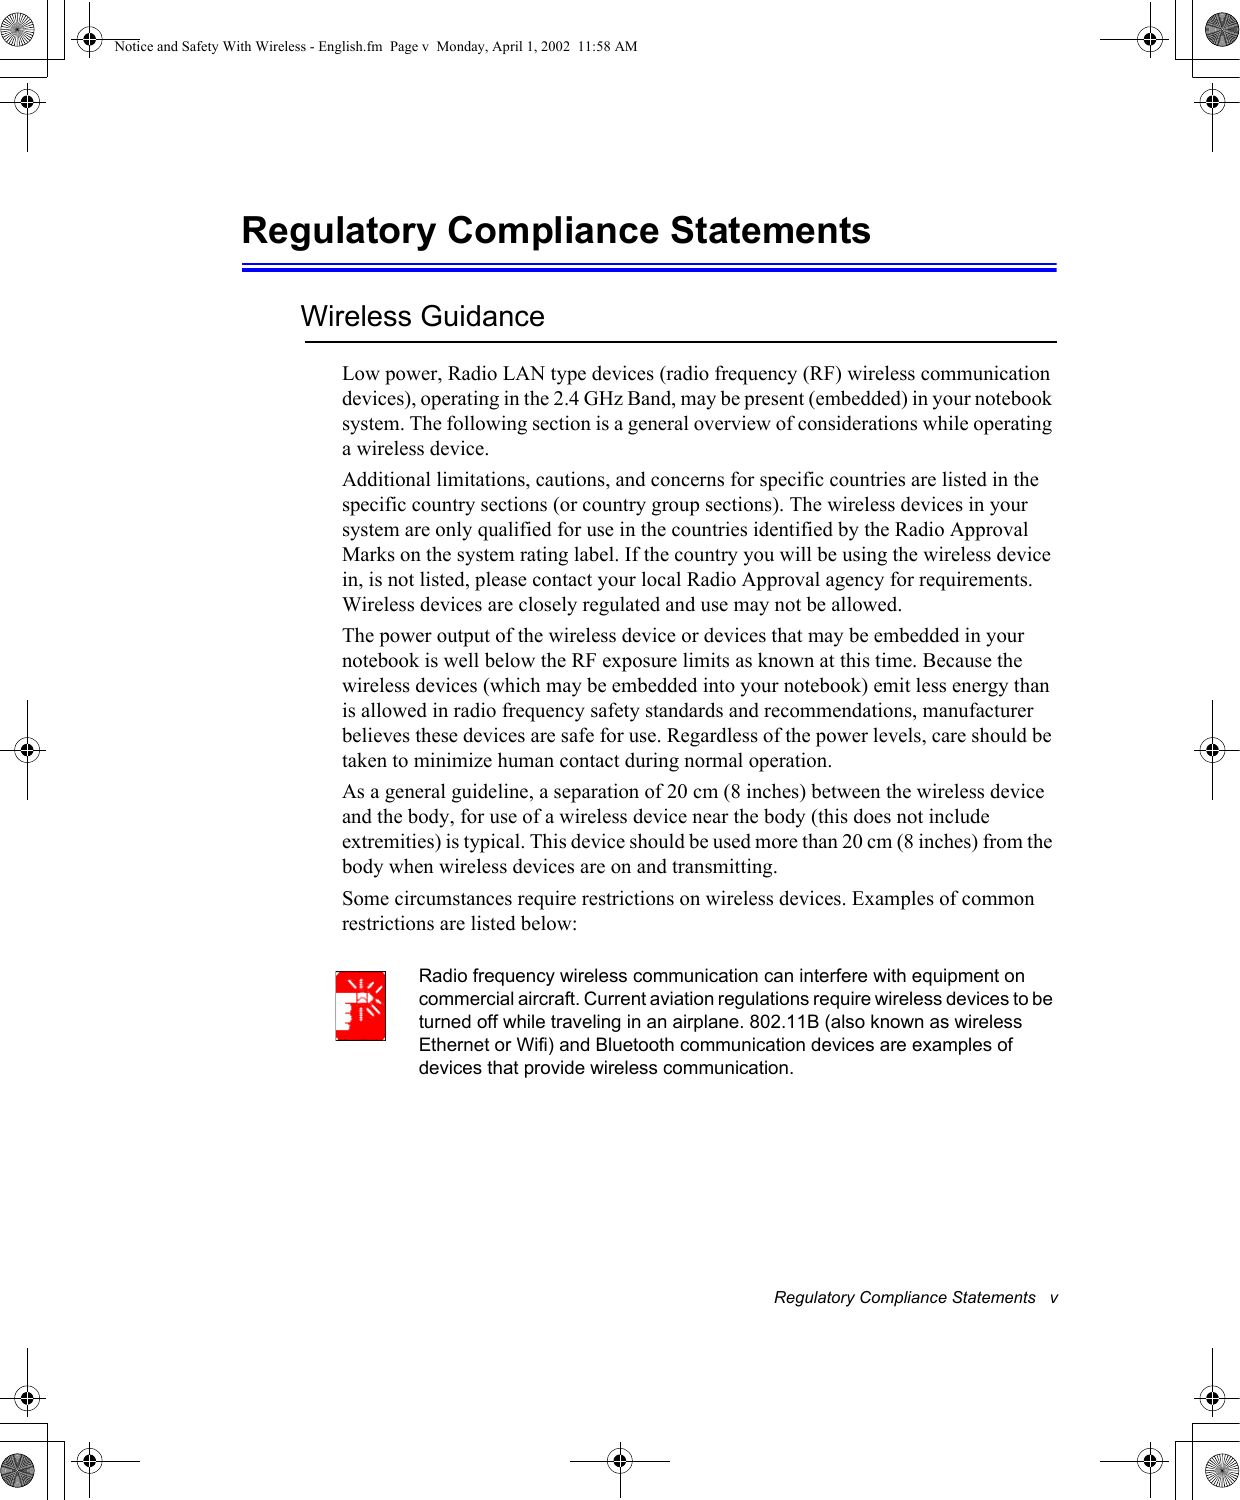 Regulatory Compliance Statements   vRegulatory Compliance StatementsWireless GuidanceLow power, Radio LAN type devices (radio frequency (RF) wireless communication devices), operating in the 2.4 GHz Band, may be present (embedded) in your notebook system. The following section is a general overview of considerations while operating a wireless device.Additional limitations, cautions, and concerns for specific countries are listed in the specific country sections (or country group sections). The wireless devices in your system are only qualified for use in the countries identified by the Radio Approval Marks on the system rating label. If the country you will be using the wireless device in, is not listed, please contact your local Radio Approval agency for requirements. Wireless devices are closely regulated and use may not be allowed.The power output of the wireless device or devices that may be embedded in your notebook is well below the RF exposure limits as known at this time. Because the wireless devices (which may be embedded into your notebook) emit less energy than is allowed in radio frequency safety standards and recommendations, manufacturer believes these devices are safe for use. Regardless of the power levels, care should be taken to minimize human contact during normal operation.As a general guideline, a separation of 20 cm (8 inches) between the wireless device and the body, for use of a wireless device near the body (this does not include extremities) is typical. This device should be used more than 20 cm (8 inches) from the body when wireless devices are on and transmitting.Some circumstances require restrictions on wireless devices. Examples of common restrictions are listed below:Radio frequency wireless communication can interfere with equipment on commercial aircraft. Current aviation regulations require wireless devices to be turned off while traveling in an airplane. 802.11B (also known as wireless Ethernet or Wifi) and Bluetooth communication devices are examples of devices that provide wireless communication.Notice and Safety With Wireless - English.fm  Page v  Monday, April 1, 2002  11:58 AM